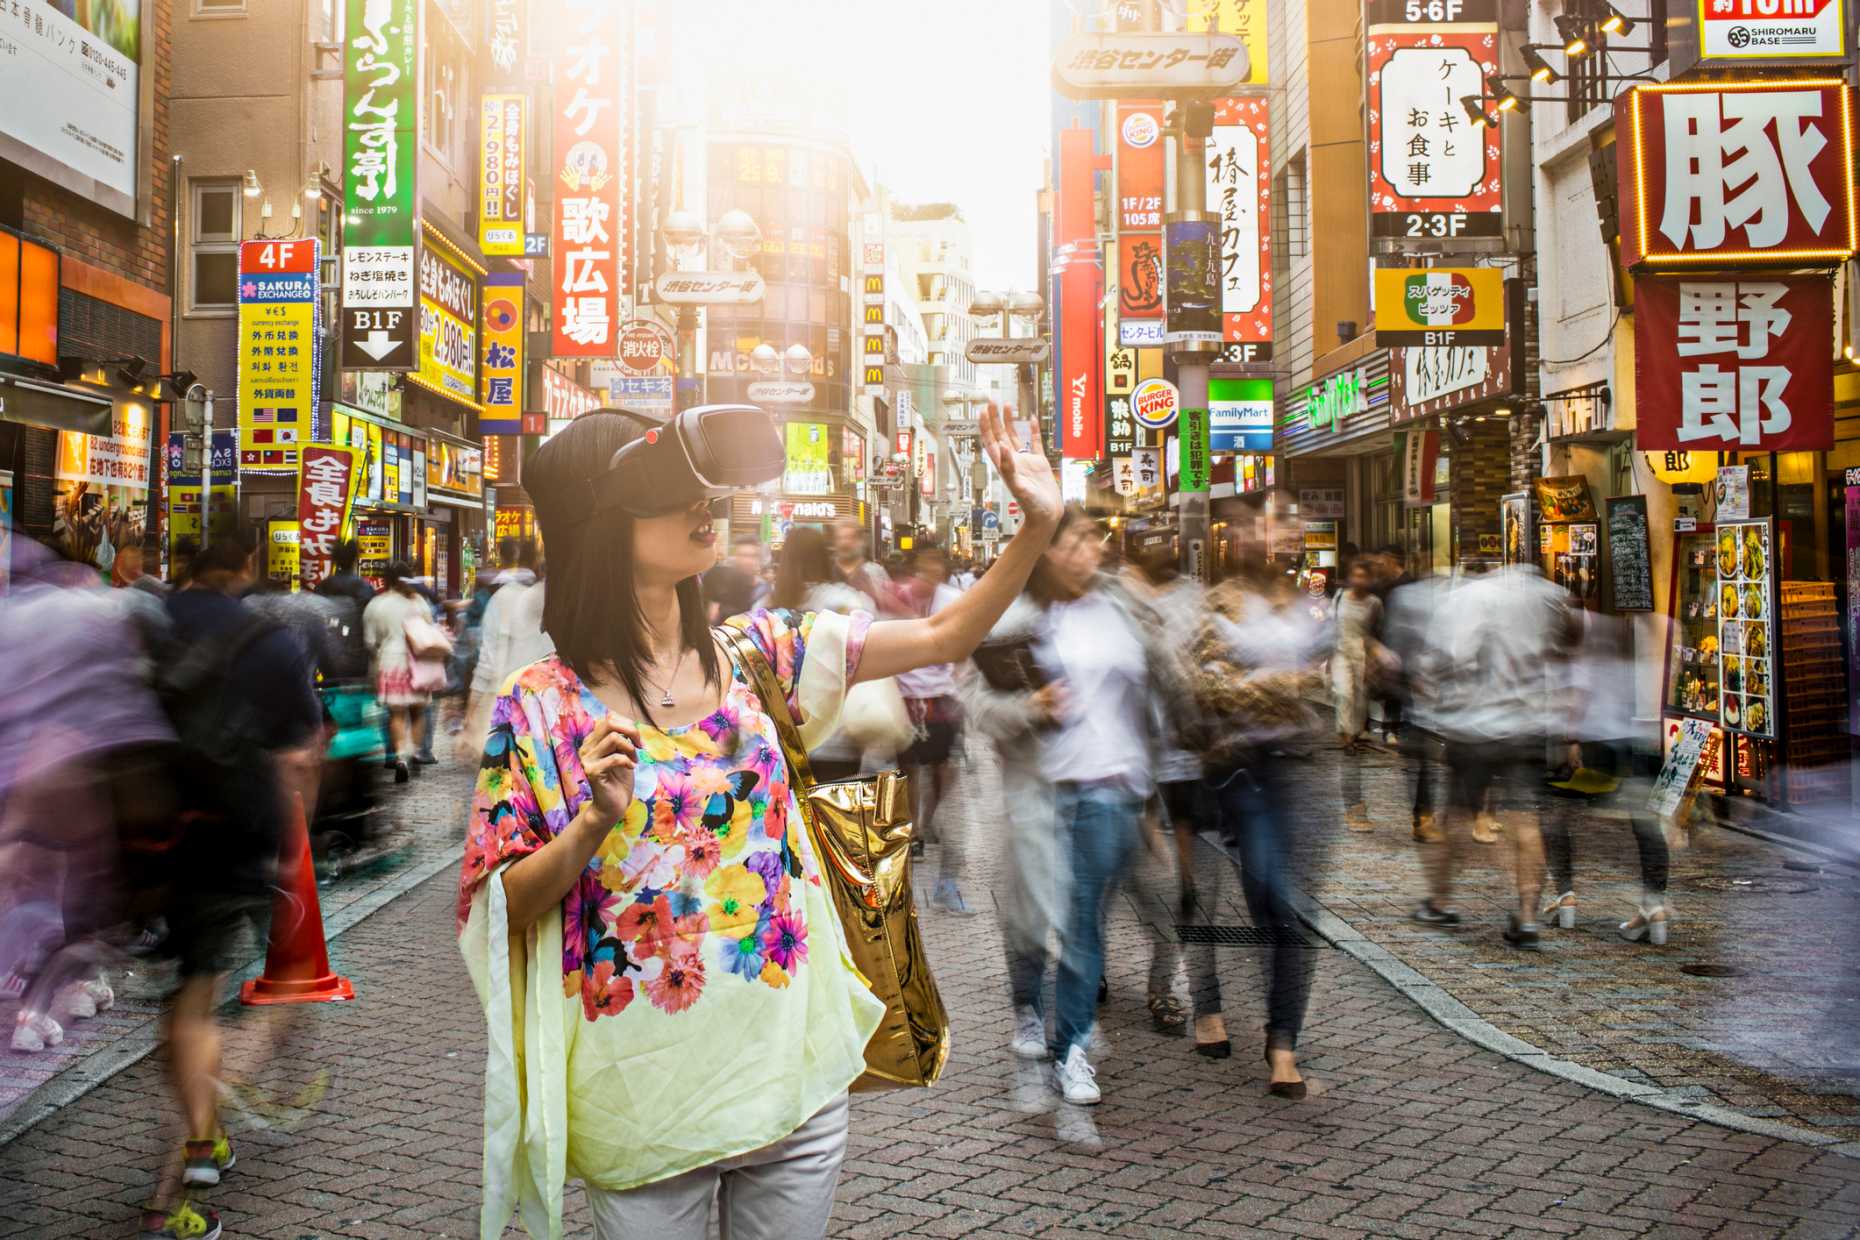 Japanese lady with 3D glasses